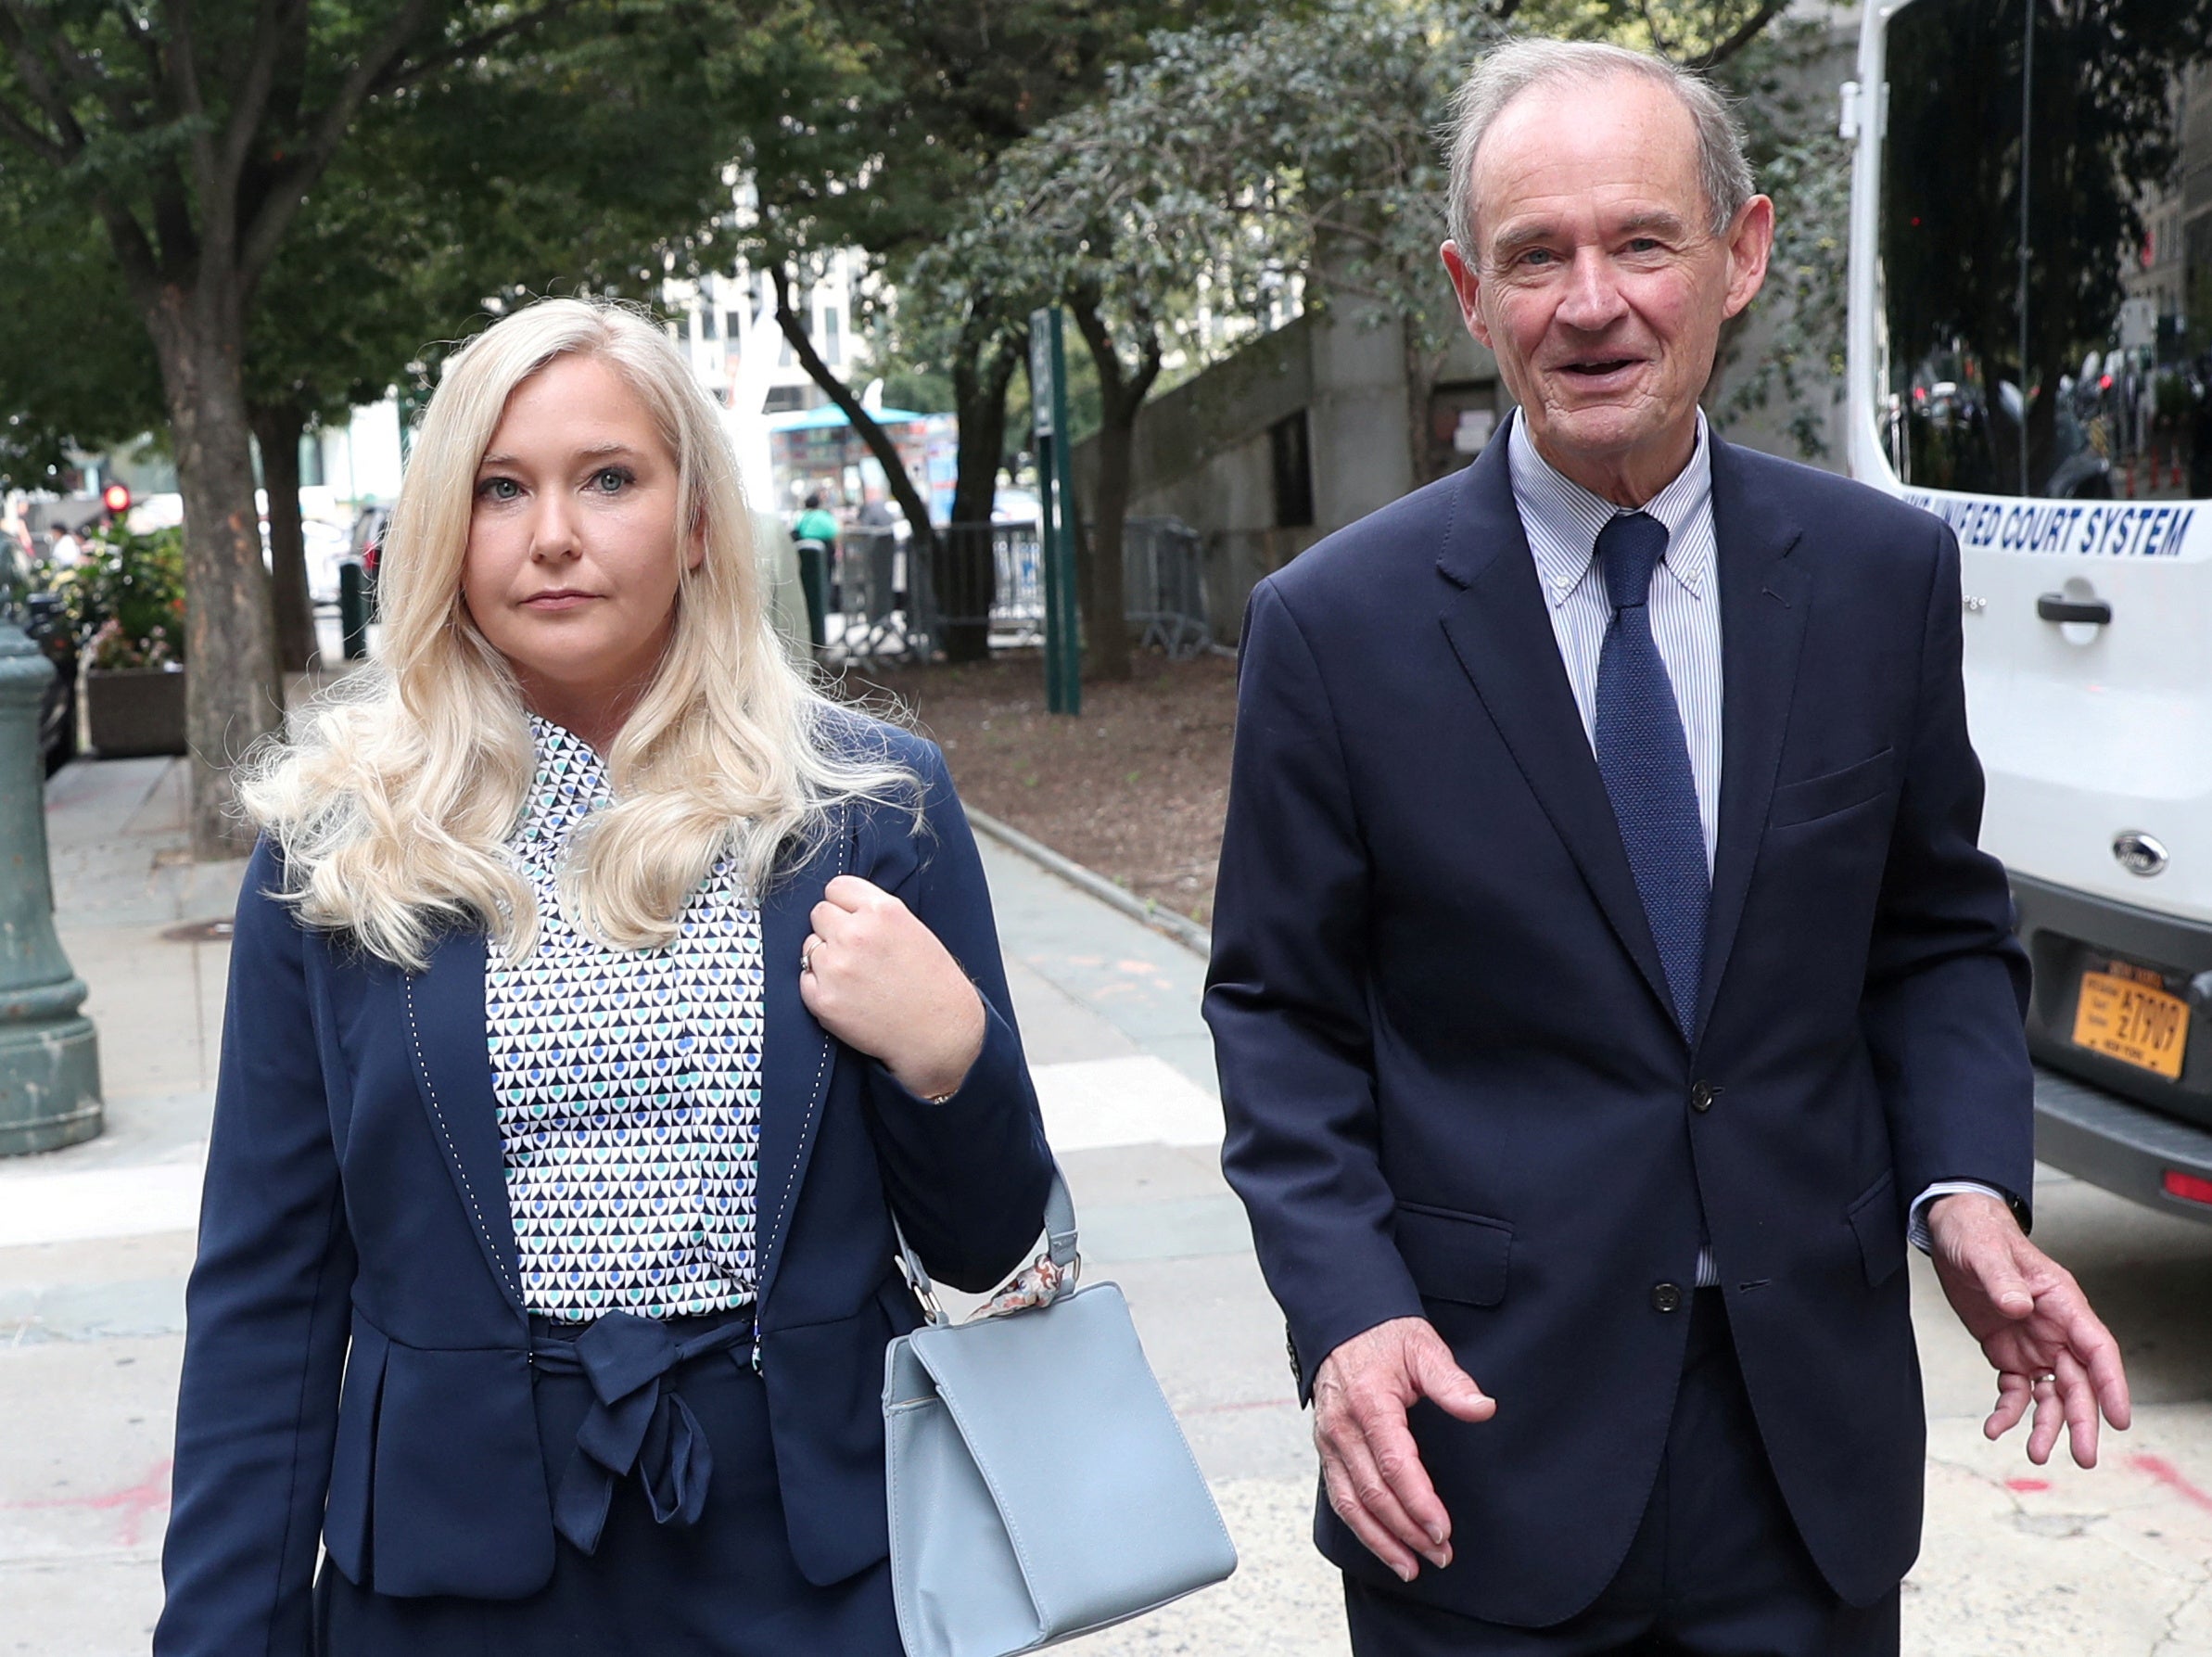 Virginia Giuffre arriving at court in New York with her lawyer David Boies in August 2019